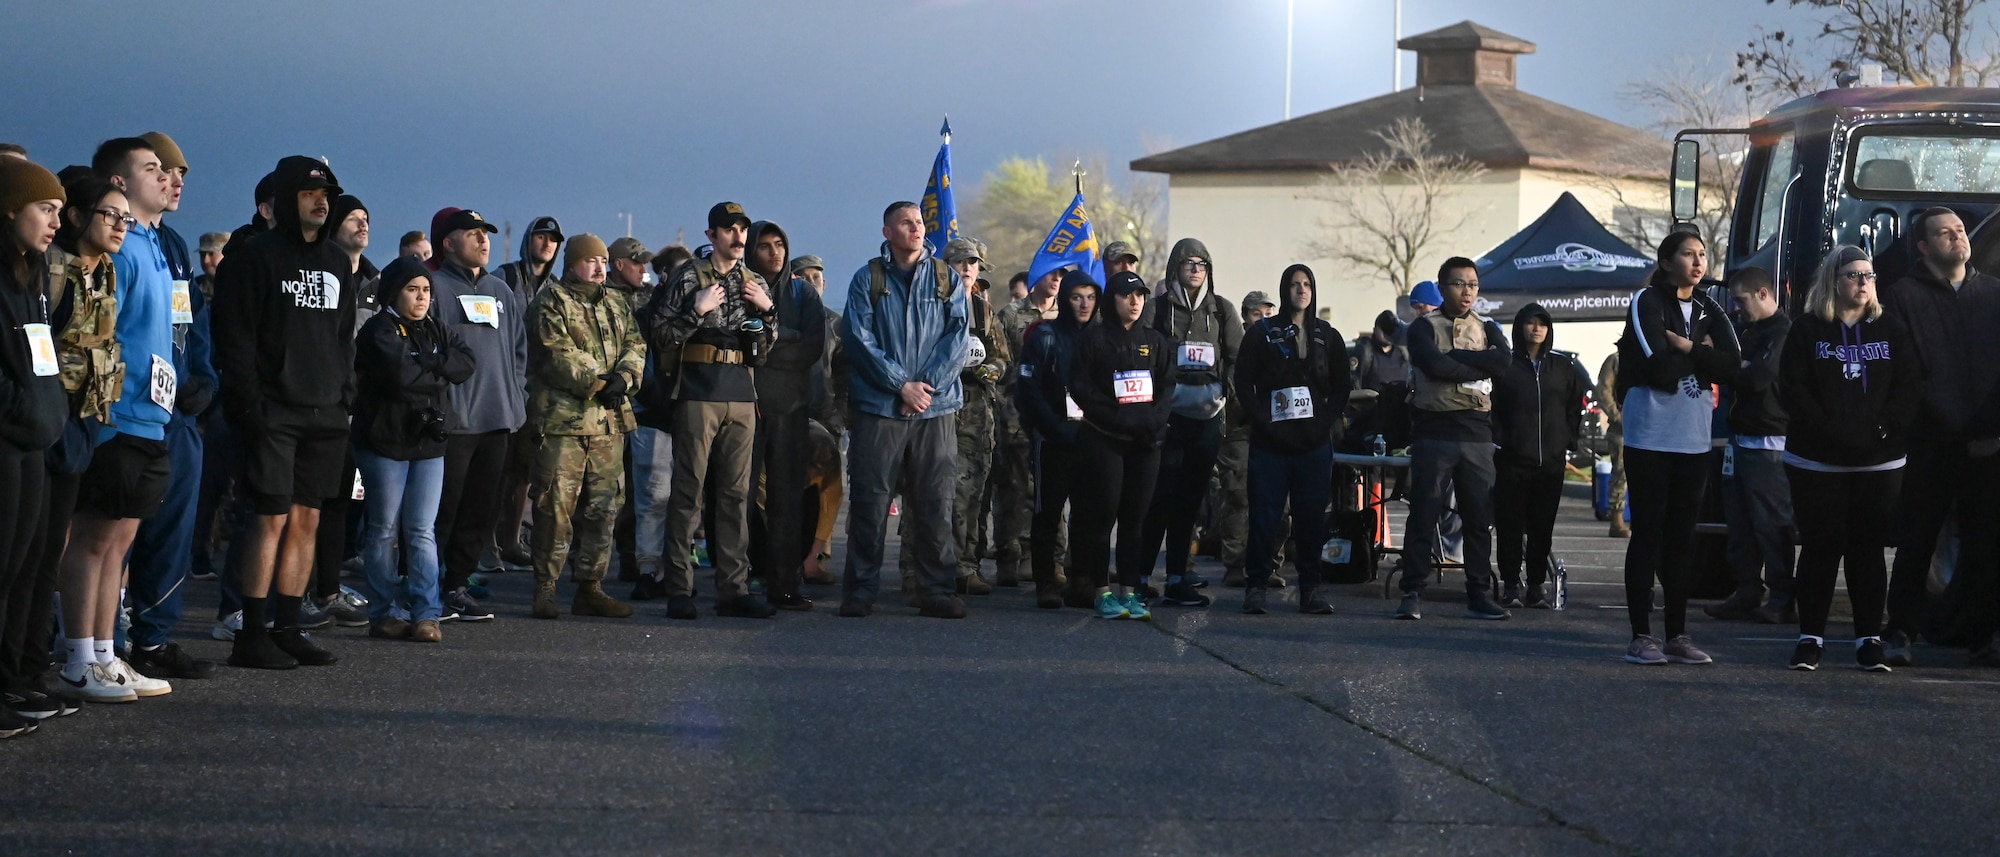 Men and women standing during opening remarks before dawn